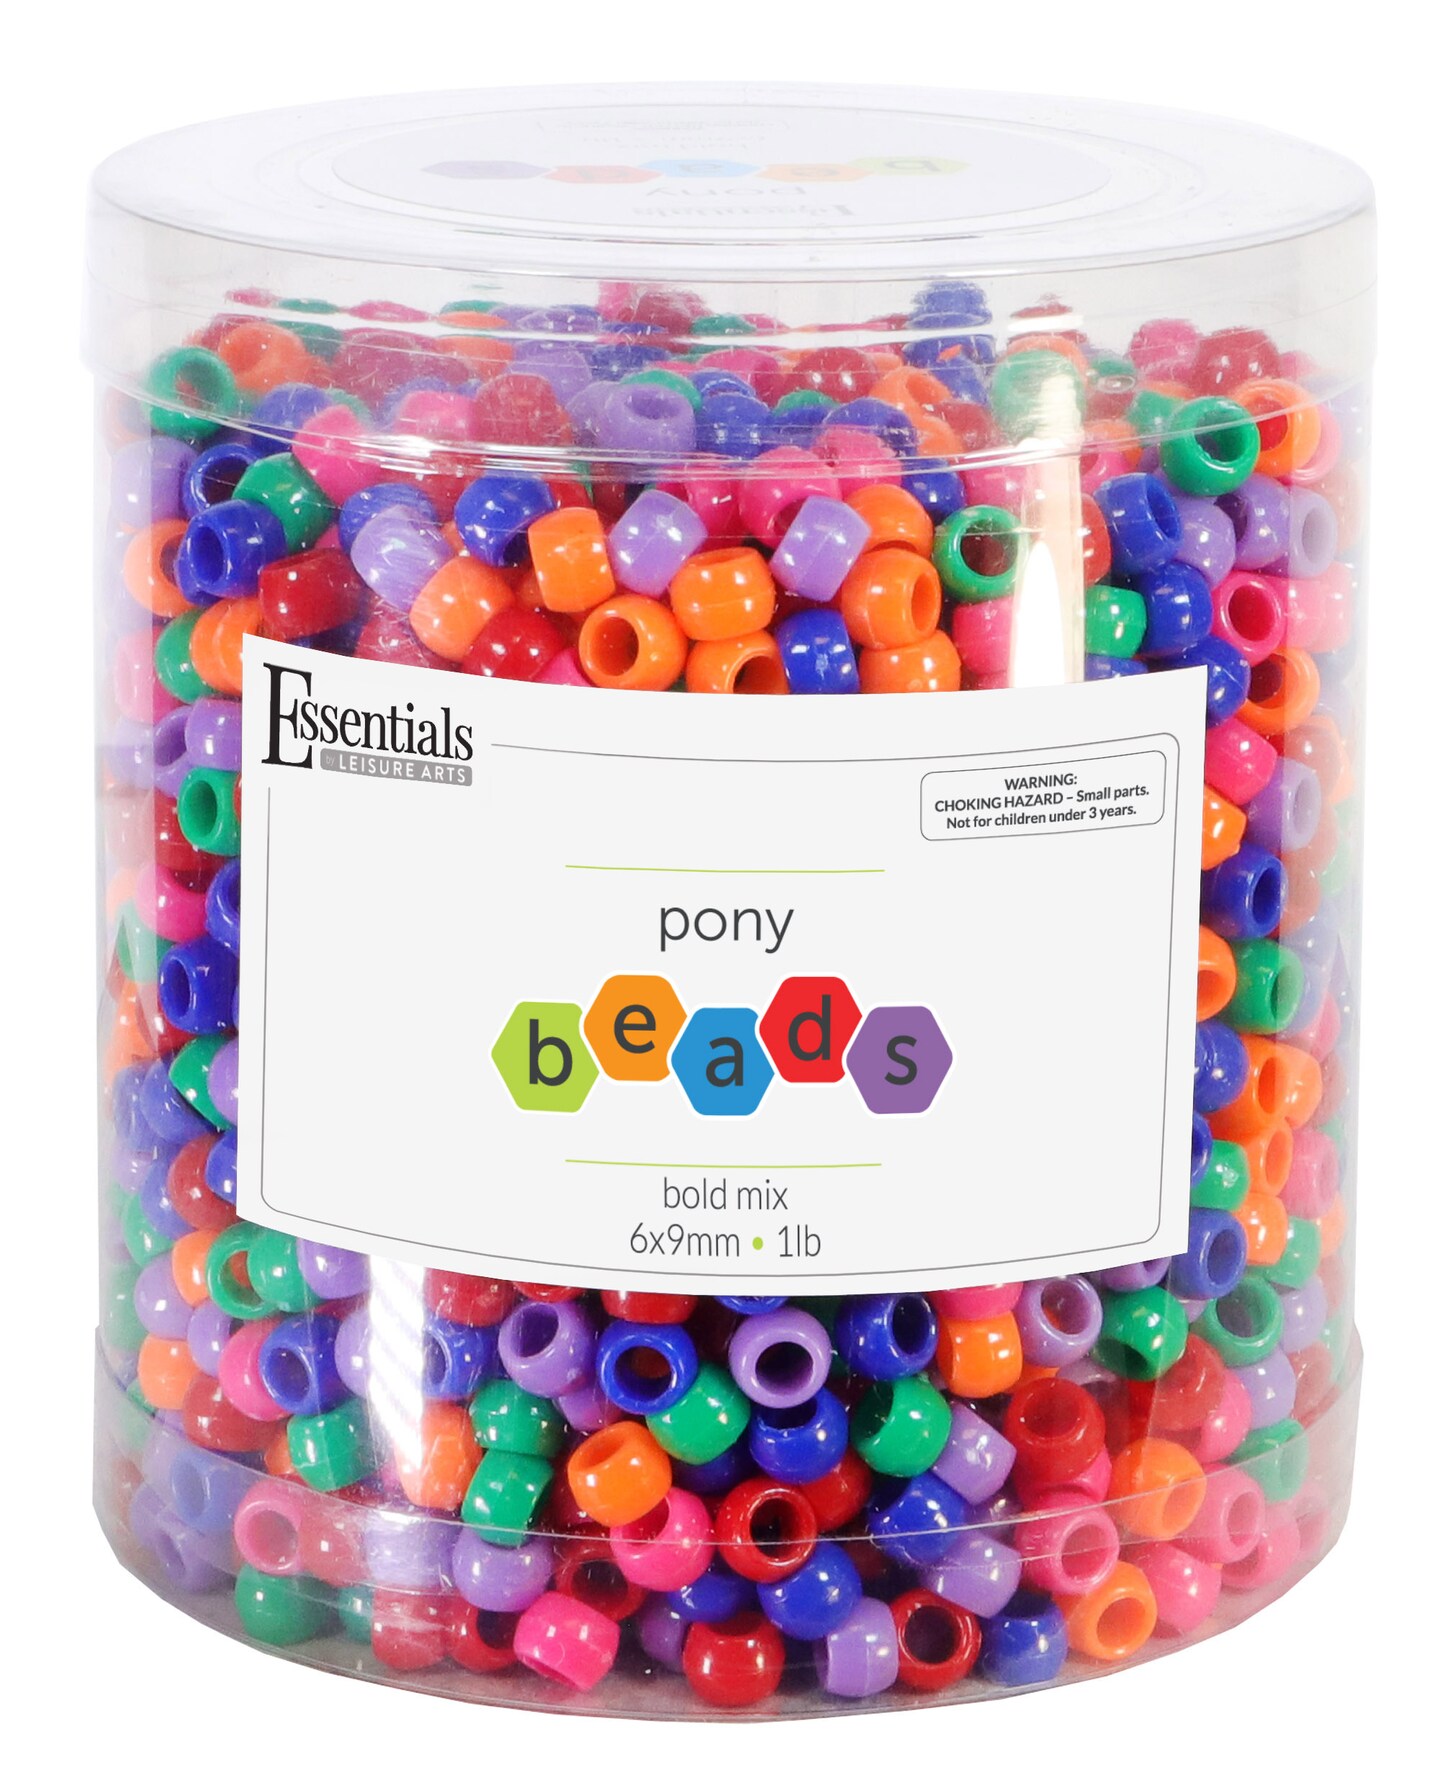 Essentials by Leisure Arts Pony Bead 6mm x 9mm Bold Mix Opaque Plastic Pony Beads Bulk 1lb for Arts, Crafts, Bracelet, Necklace, Jewelry Making, Earring, Hair Braiding